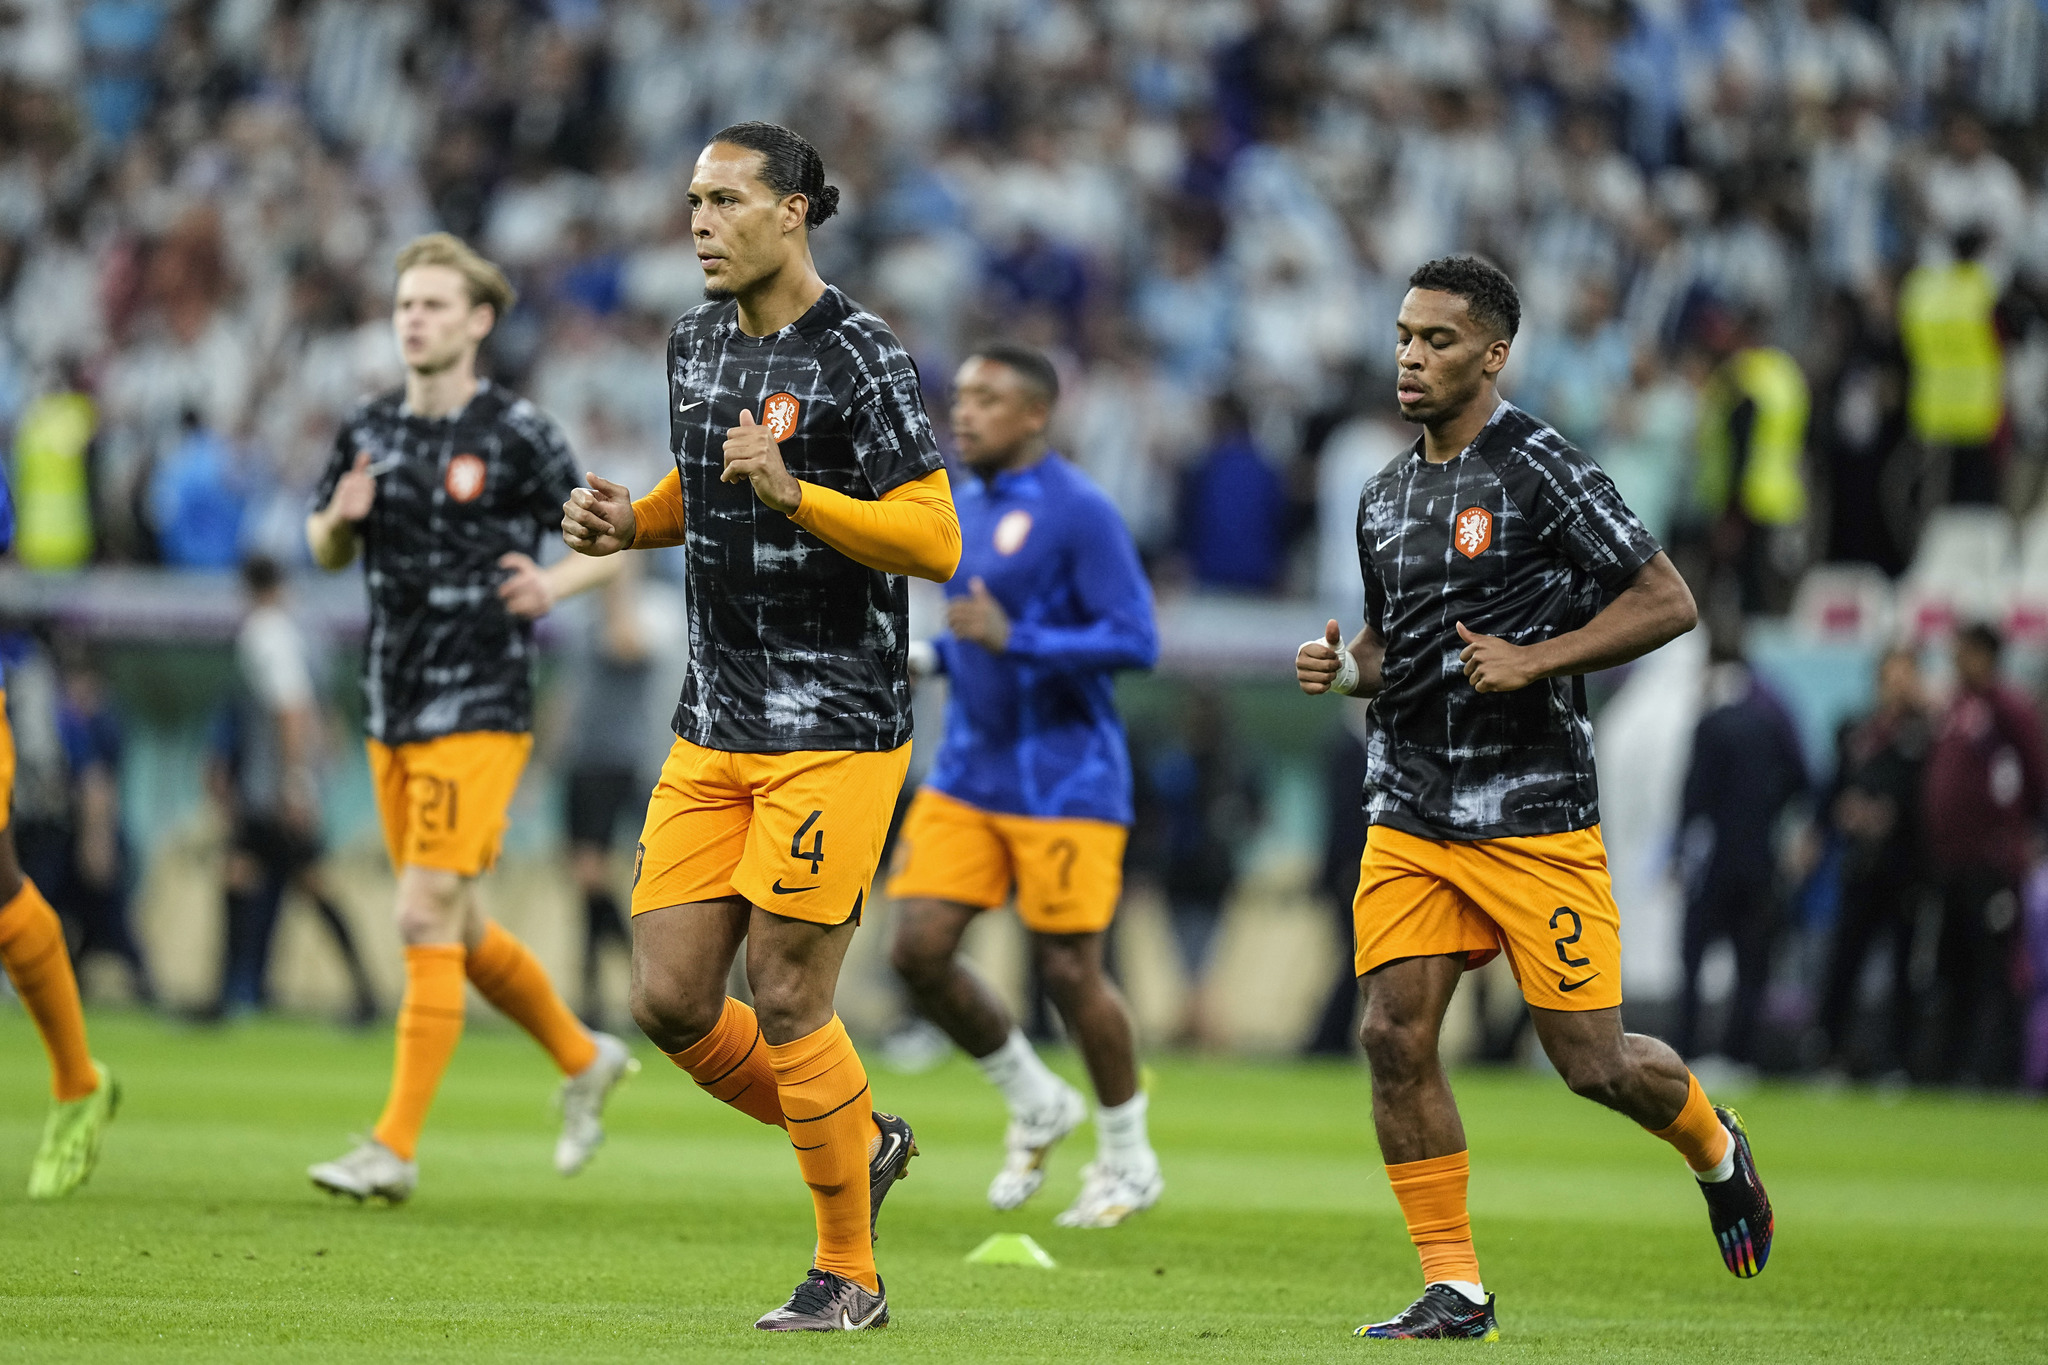 Virgil van Dijk of the Netherlands, left, and his teammate Jurrien Timber warm up prior the start of the World Cup quarterfinal soccer match between the Netherlands and  lt;HIT gt;Argentina lt;/HIT gt;, at the Lusail Stadium in Lusail, Qatar, Friday, Dec. 9, 2022. (AP Photo/Jorge Saenz)